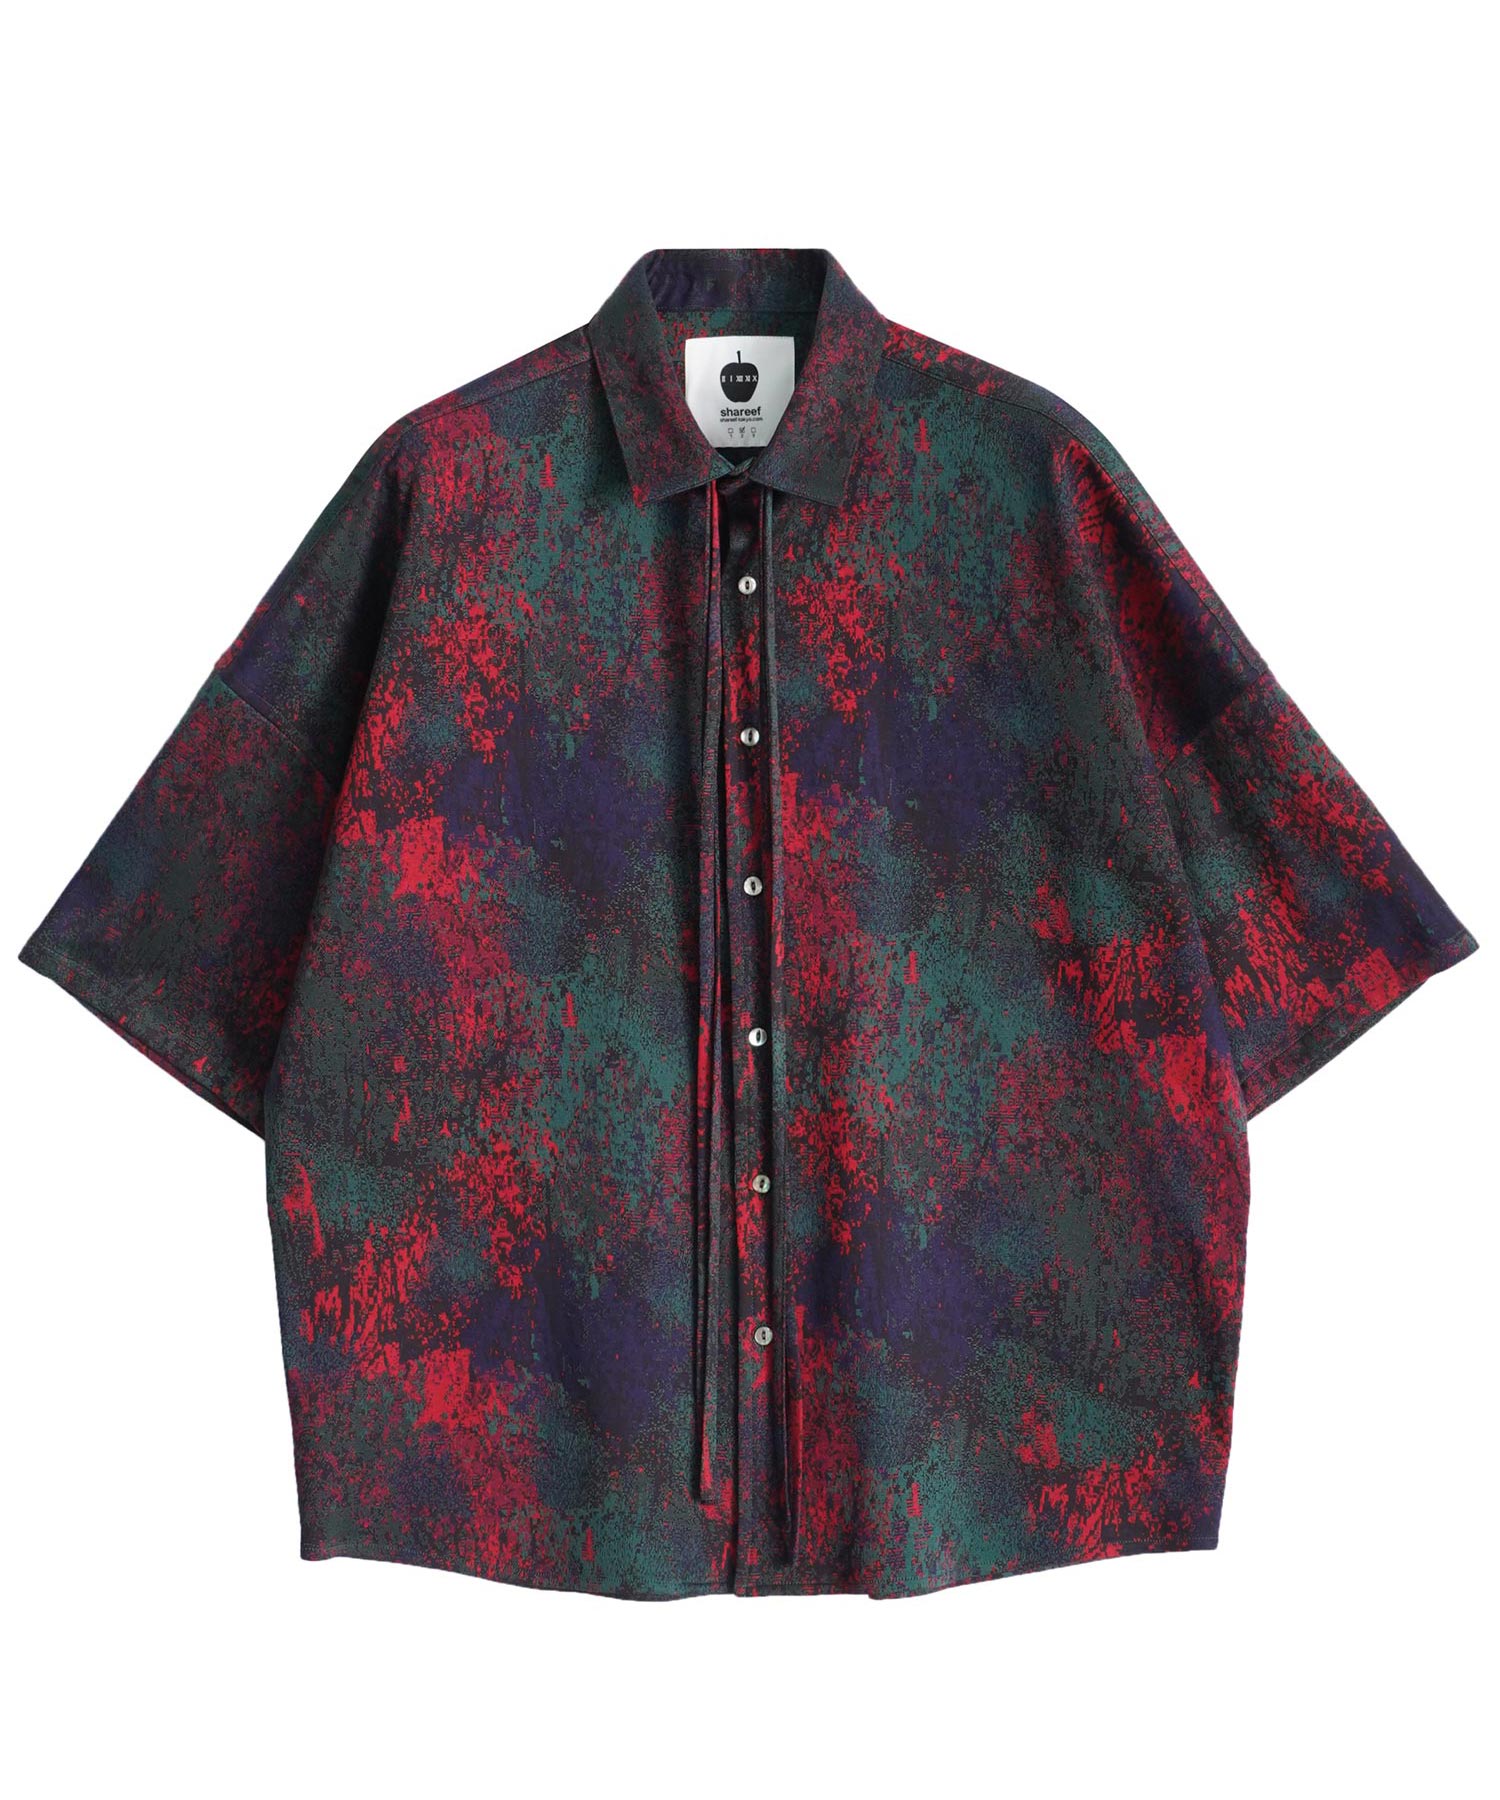 SHAREEF ONLINE SHOP / ABSTRACT JQ S/S SHIRTS